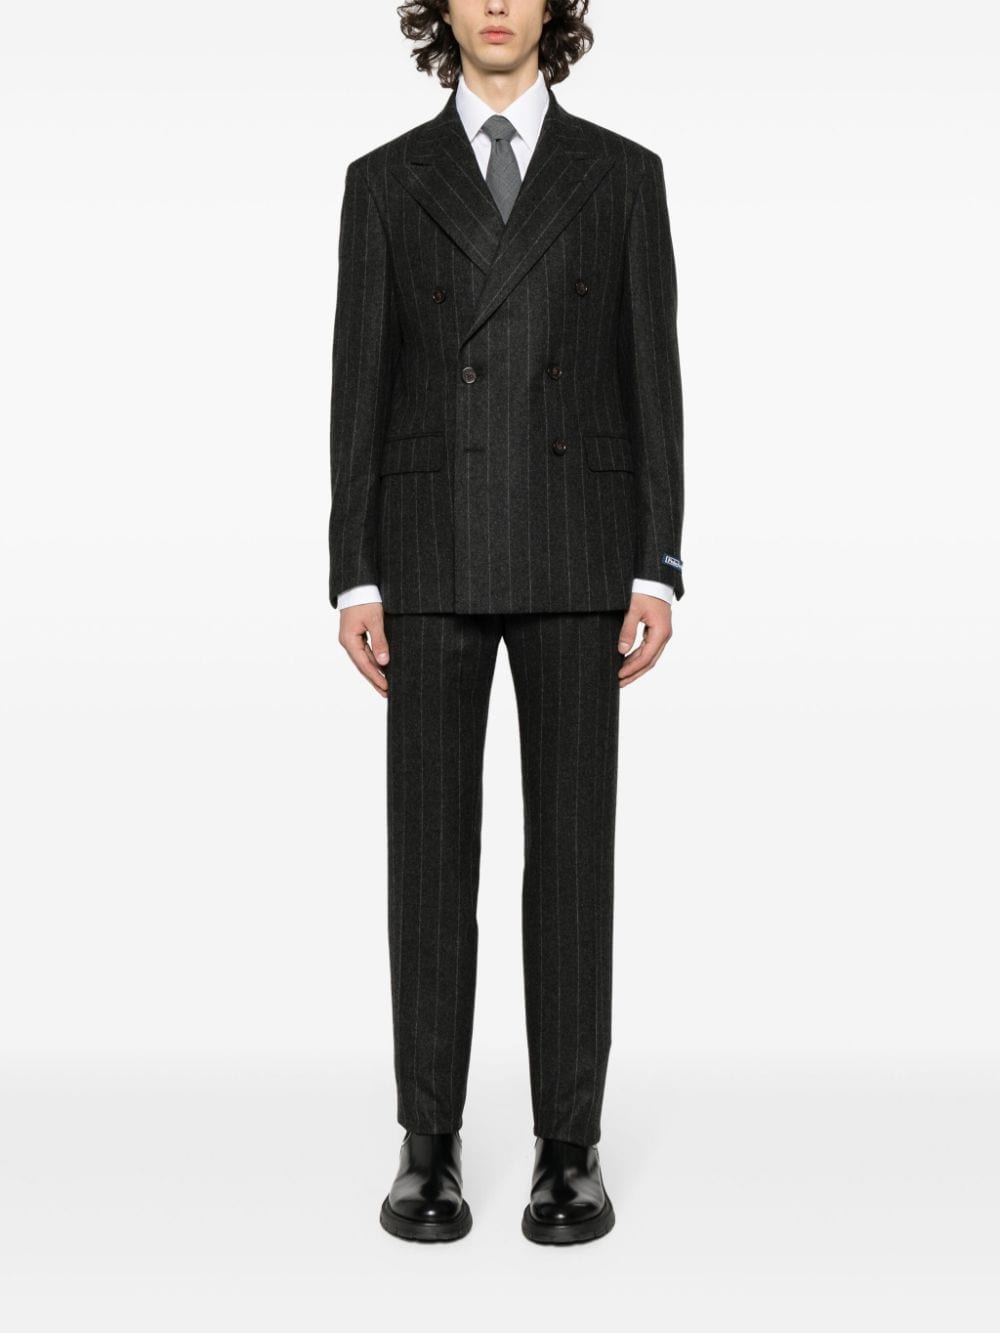 Polo Ralph Lauren double-breasted Pinstriped Wool Suit - Farfetch